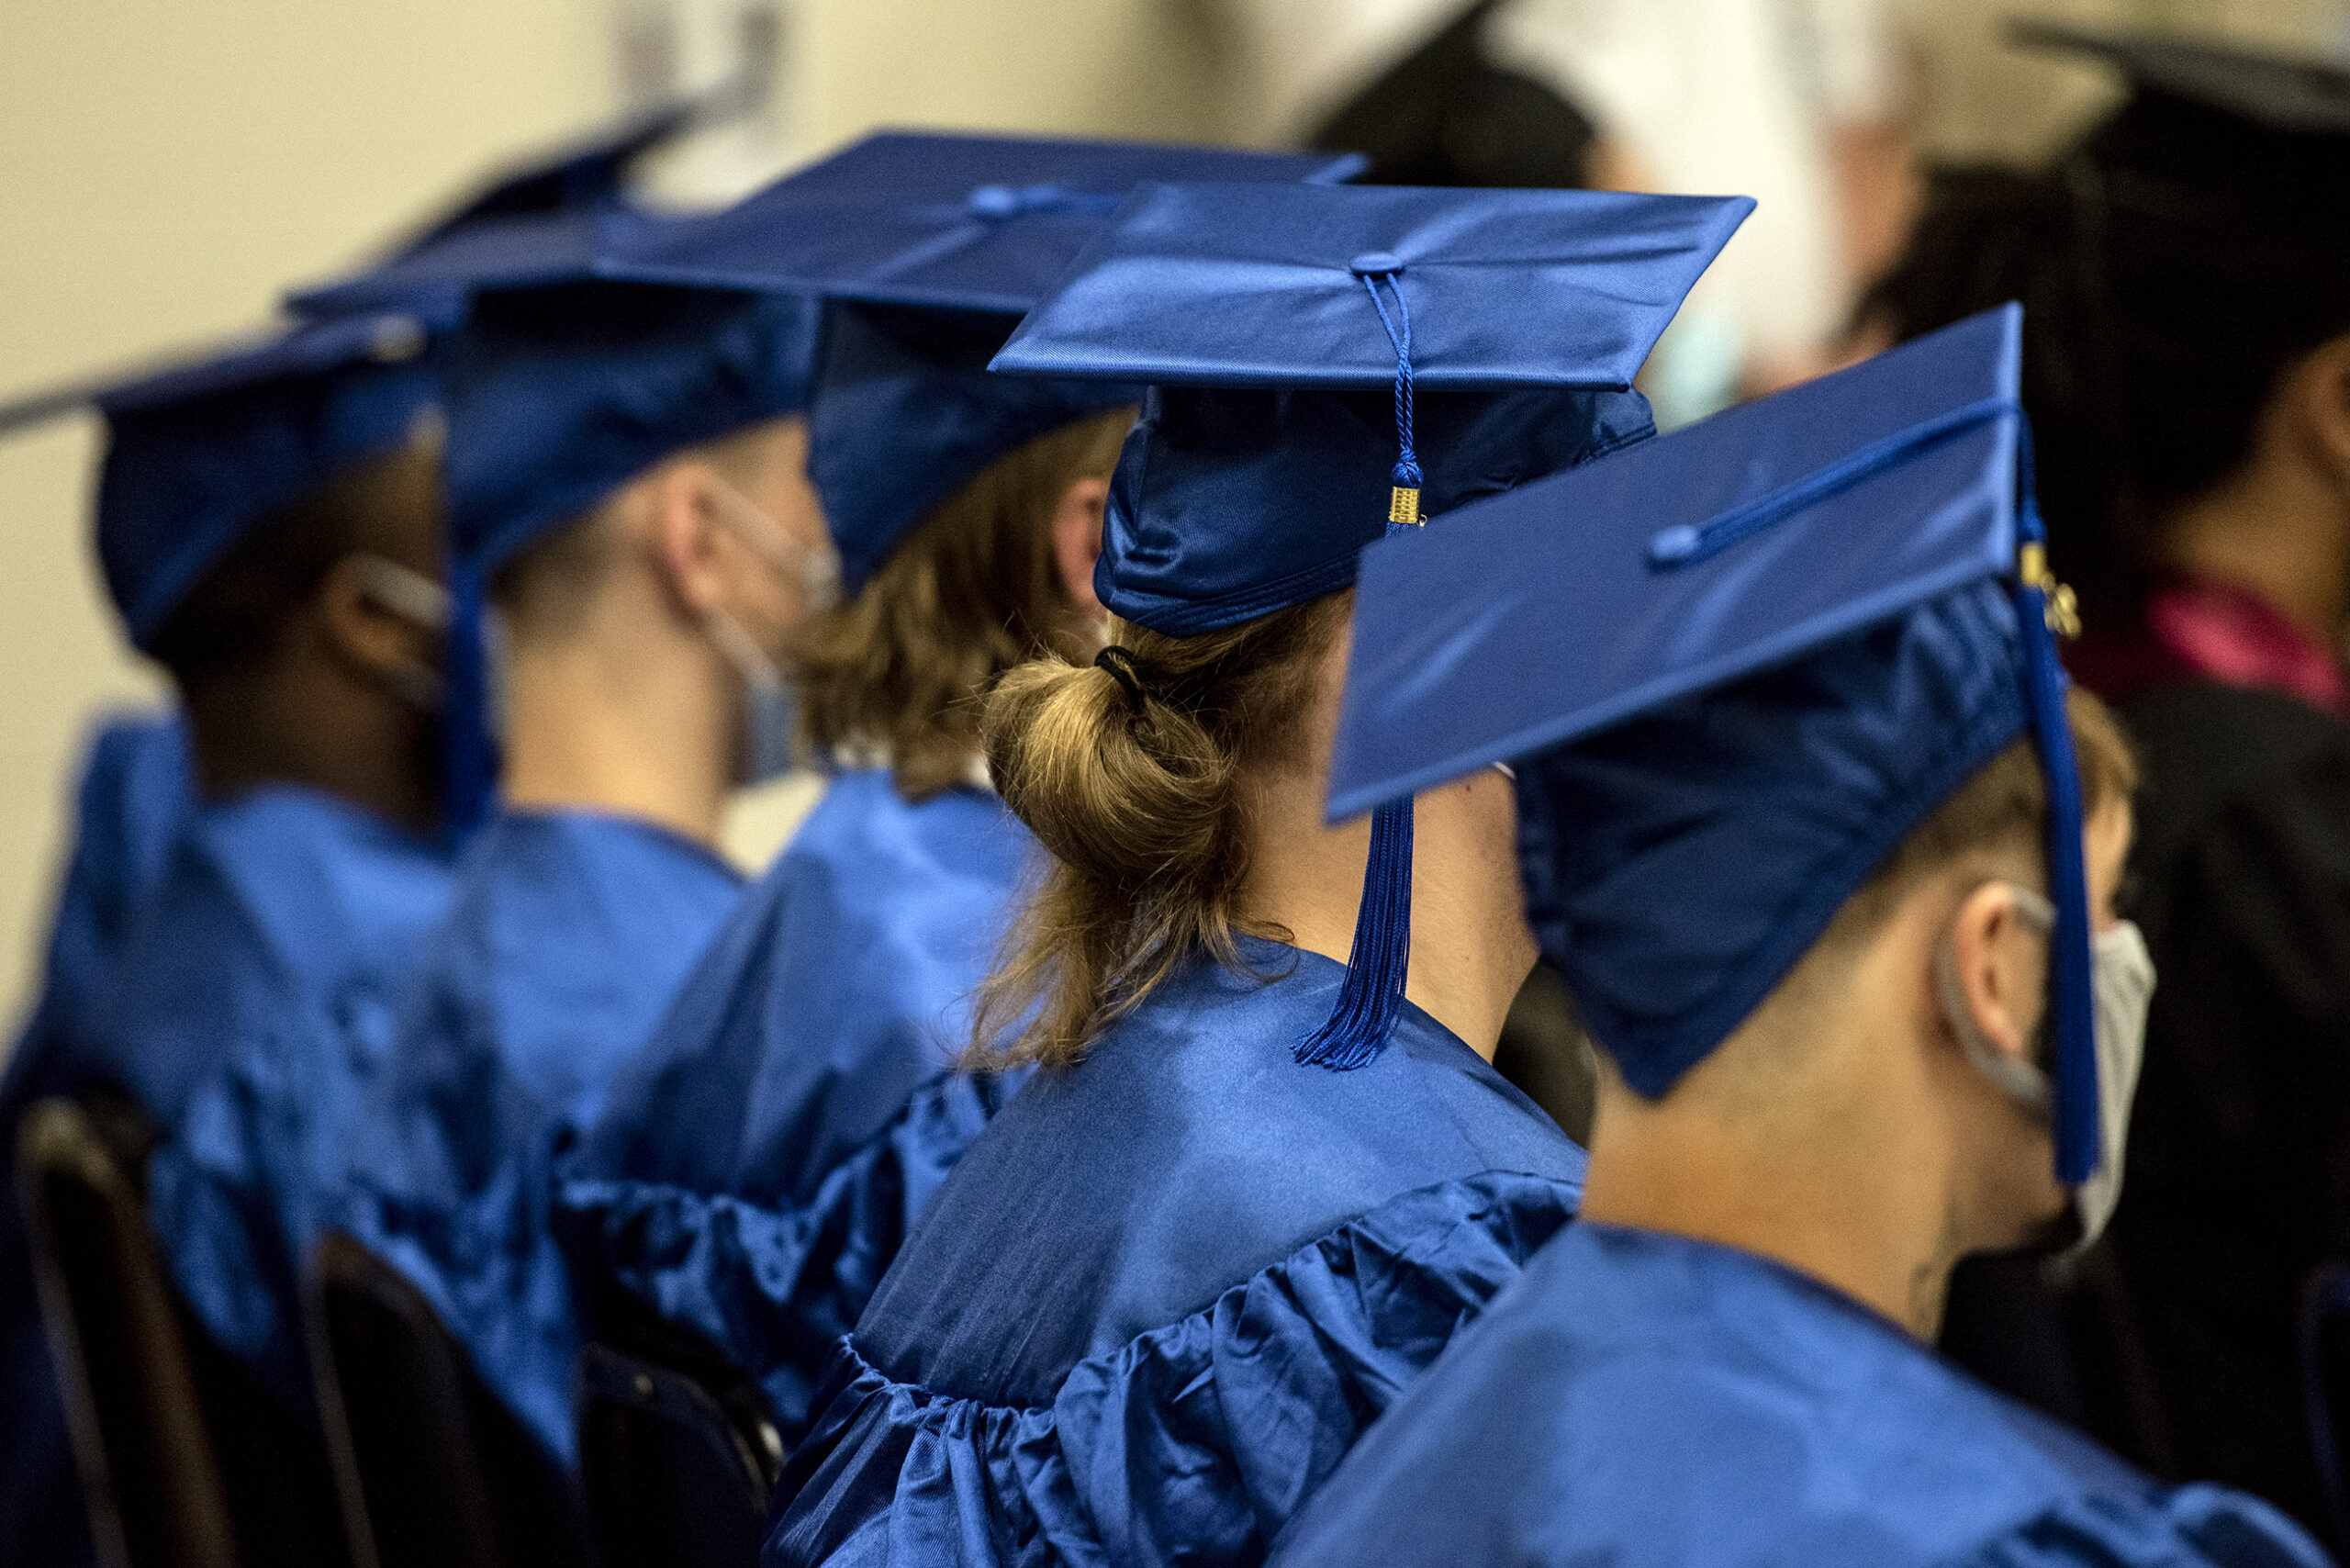 Blue graduation caps can be seen in a line as graduates sit together.